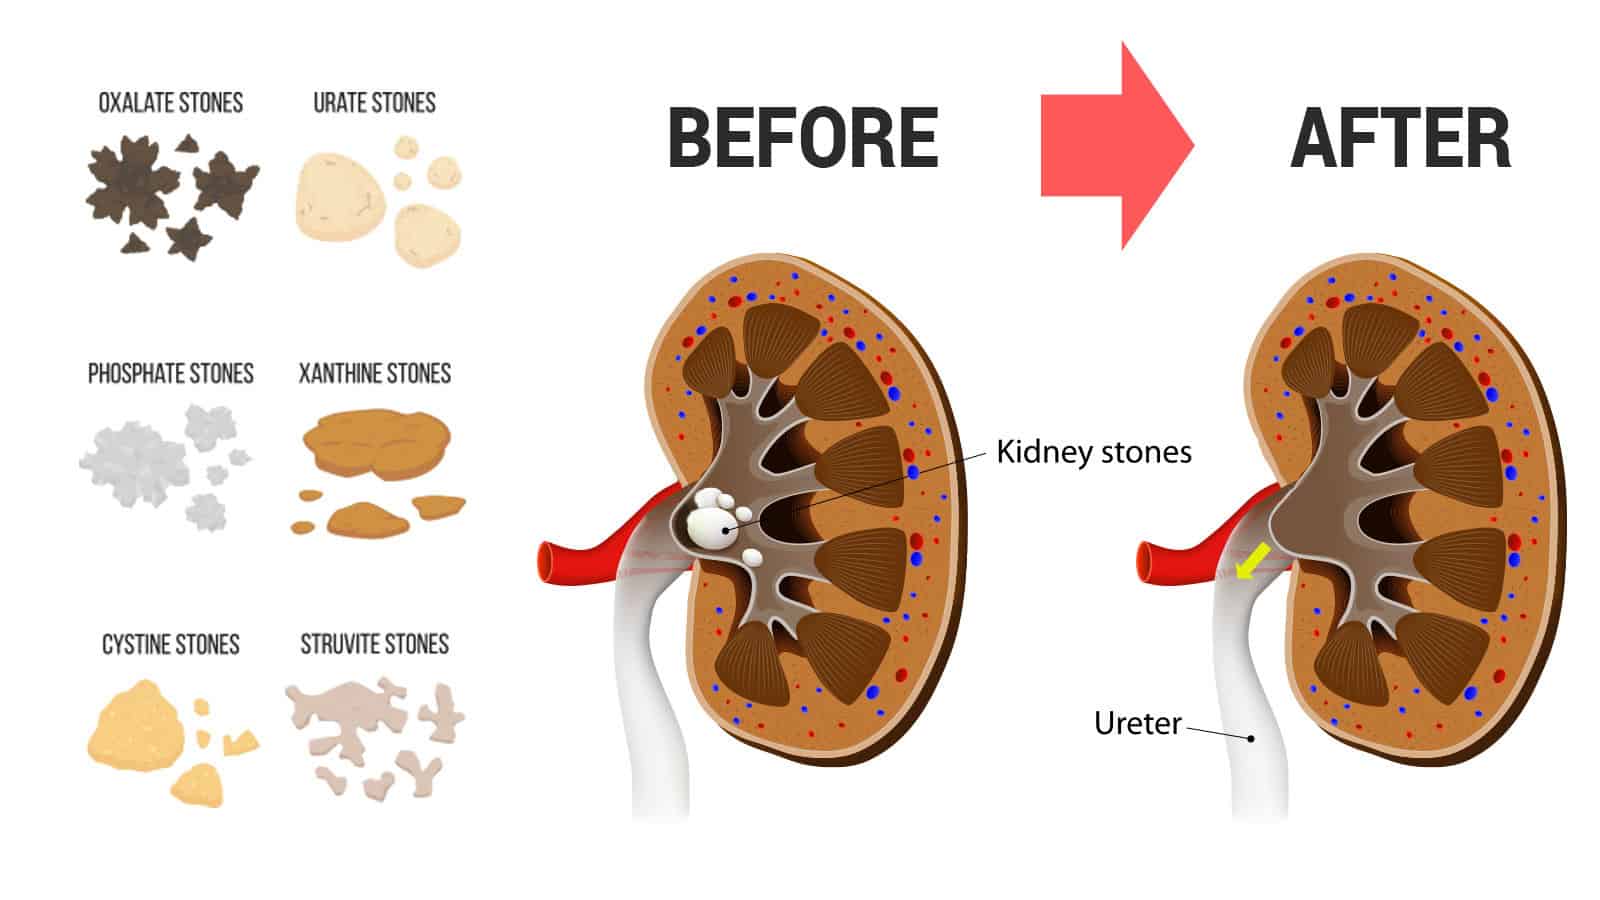 Researchers Reveal New Treatment to Help Flush Kidney Stones